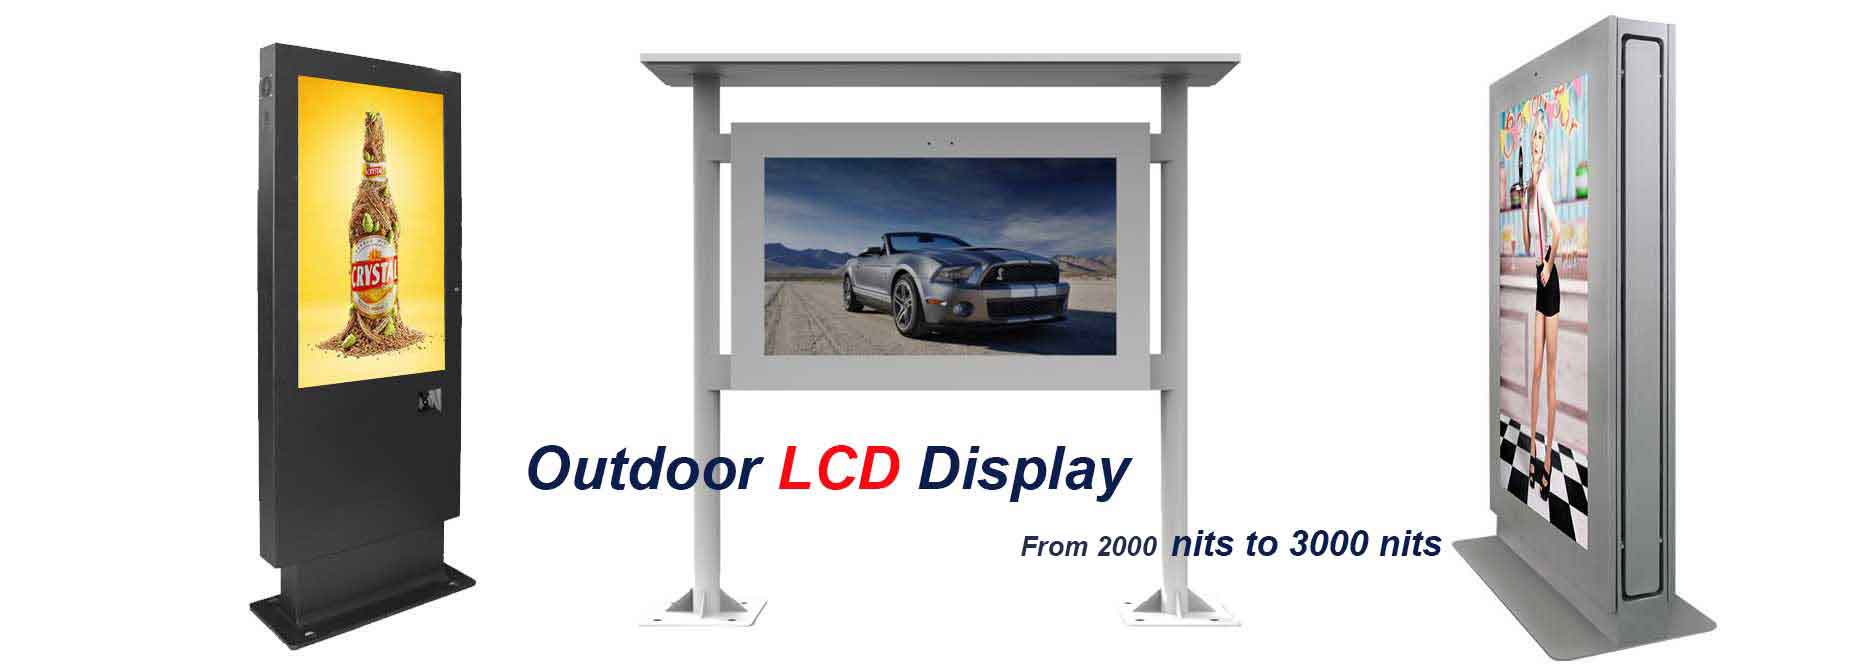 outdoor display screens for the hot models outdoor sunlight readable display 3000nits